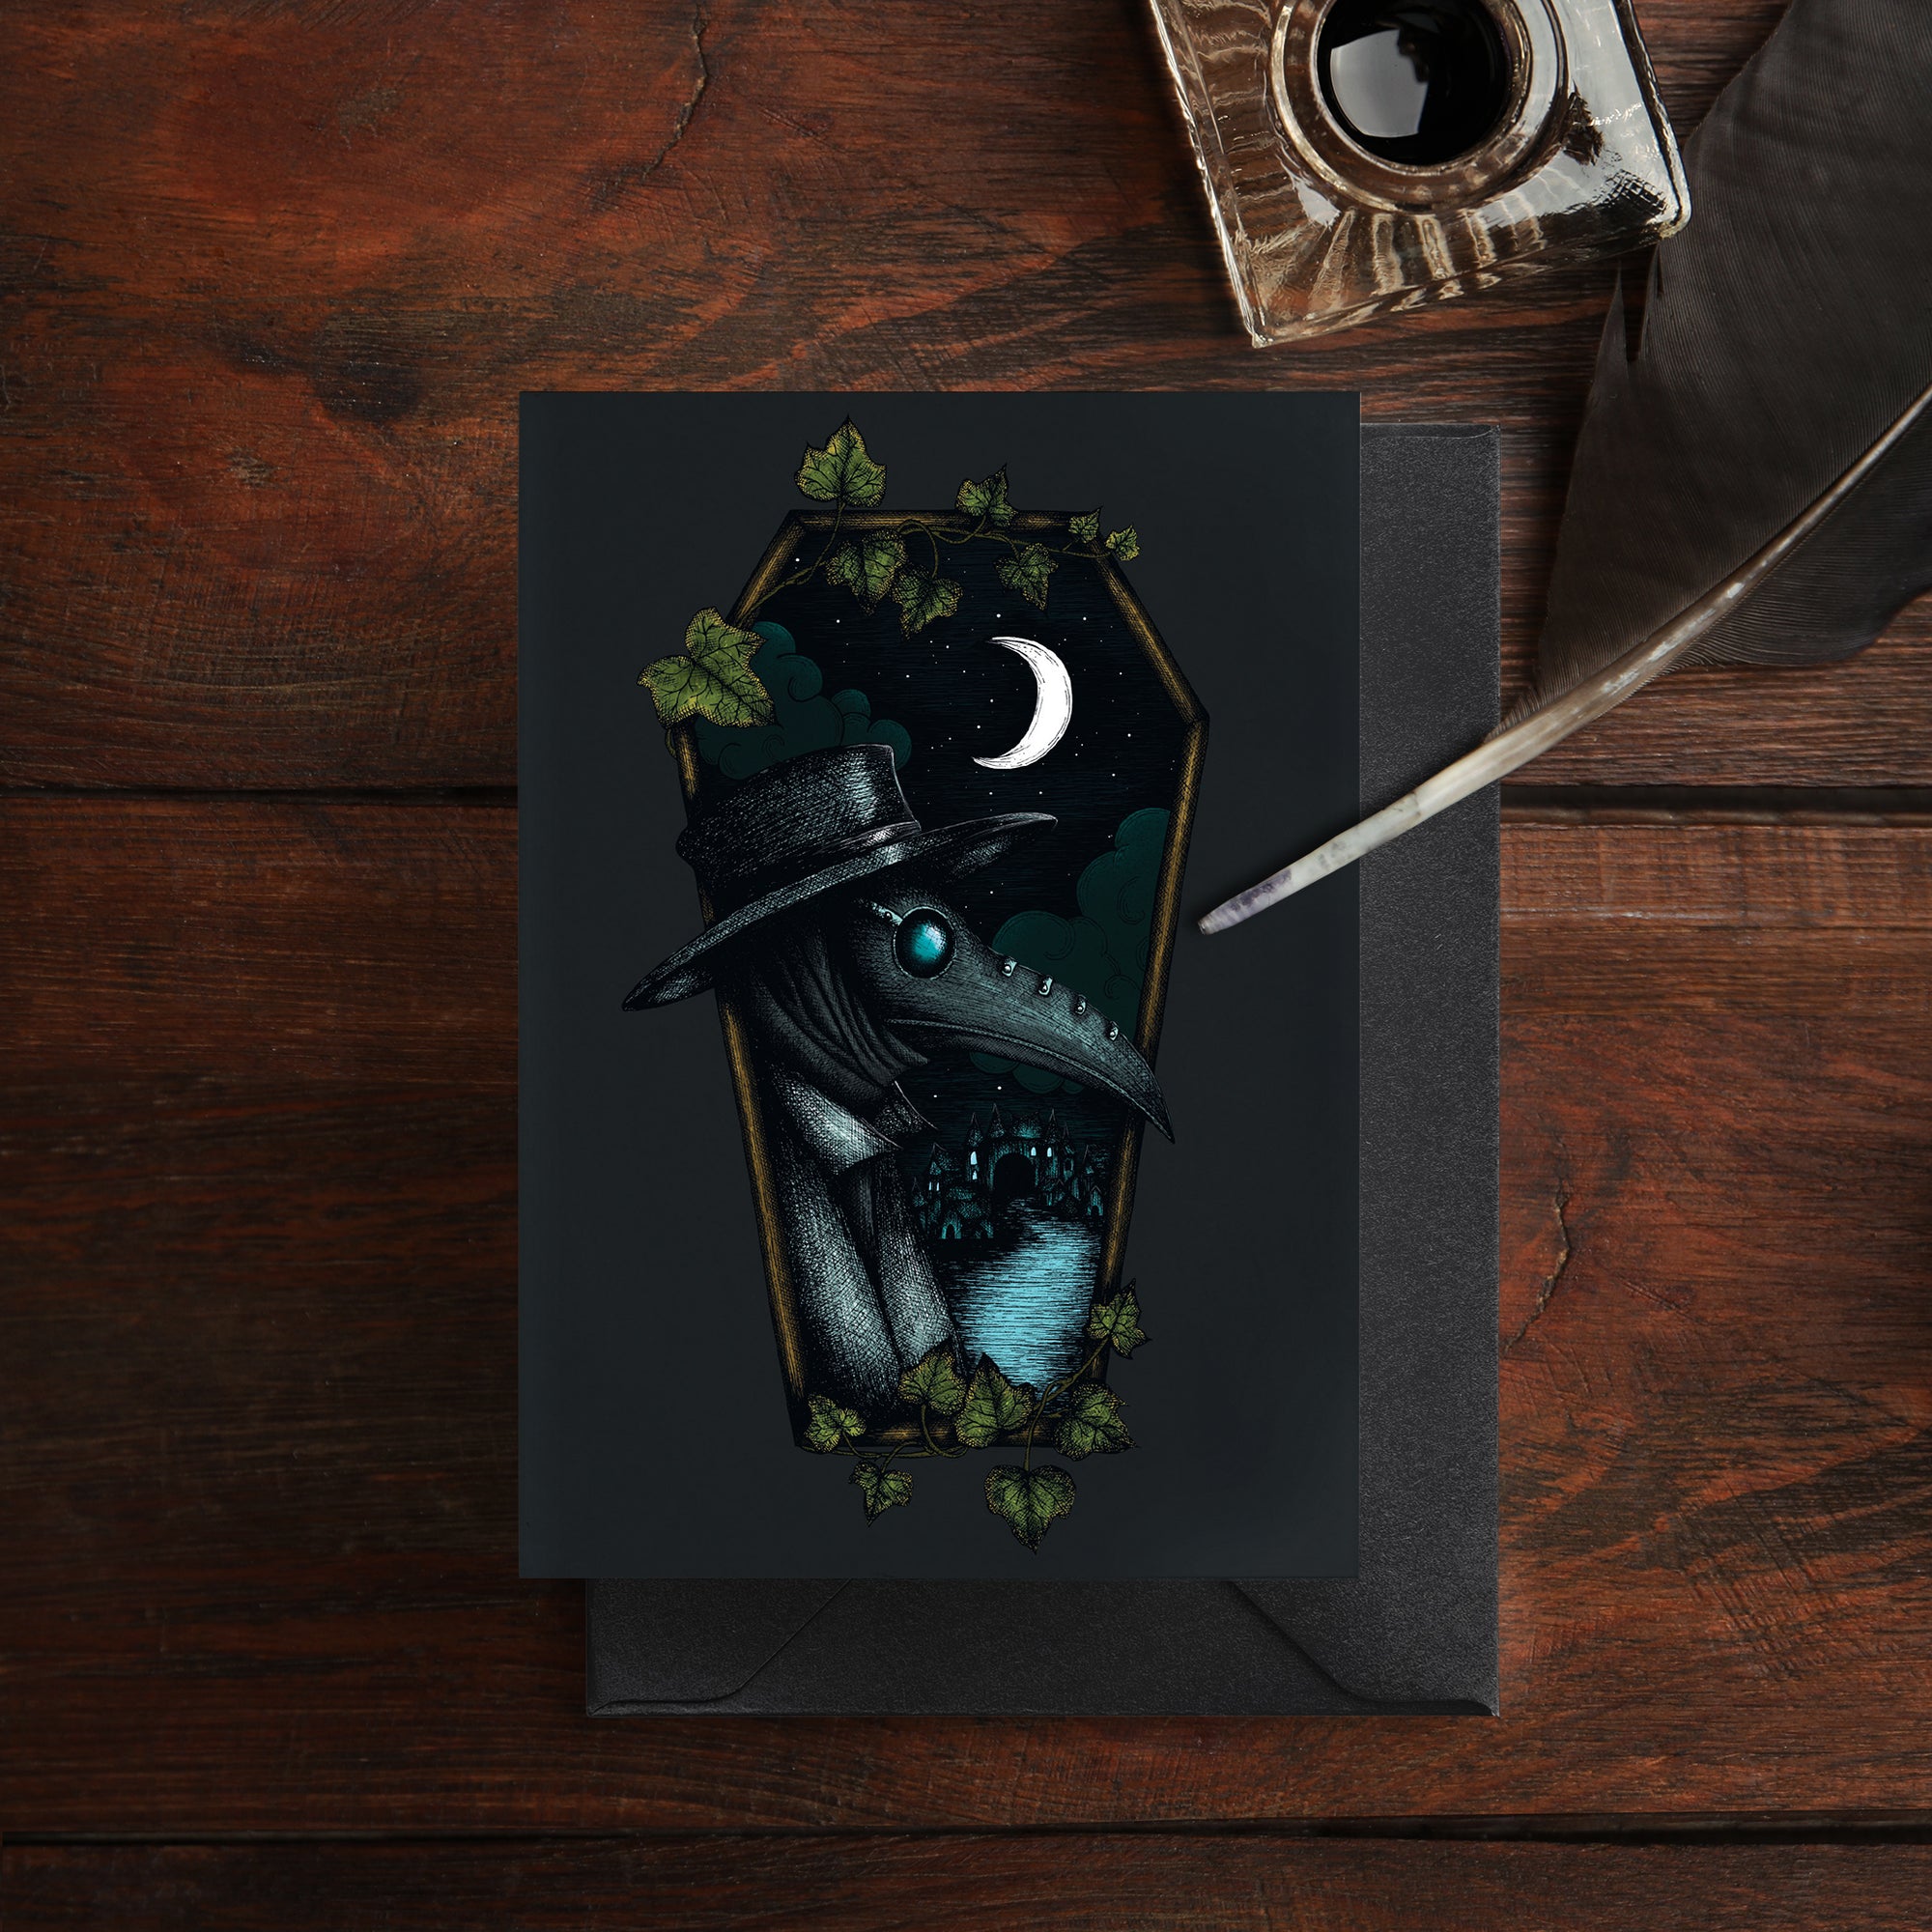 Plague Doctor Coffin - Greeting Card (Gloss)